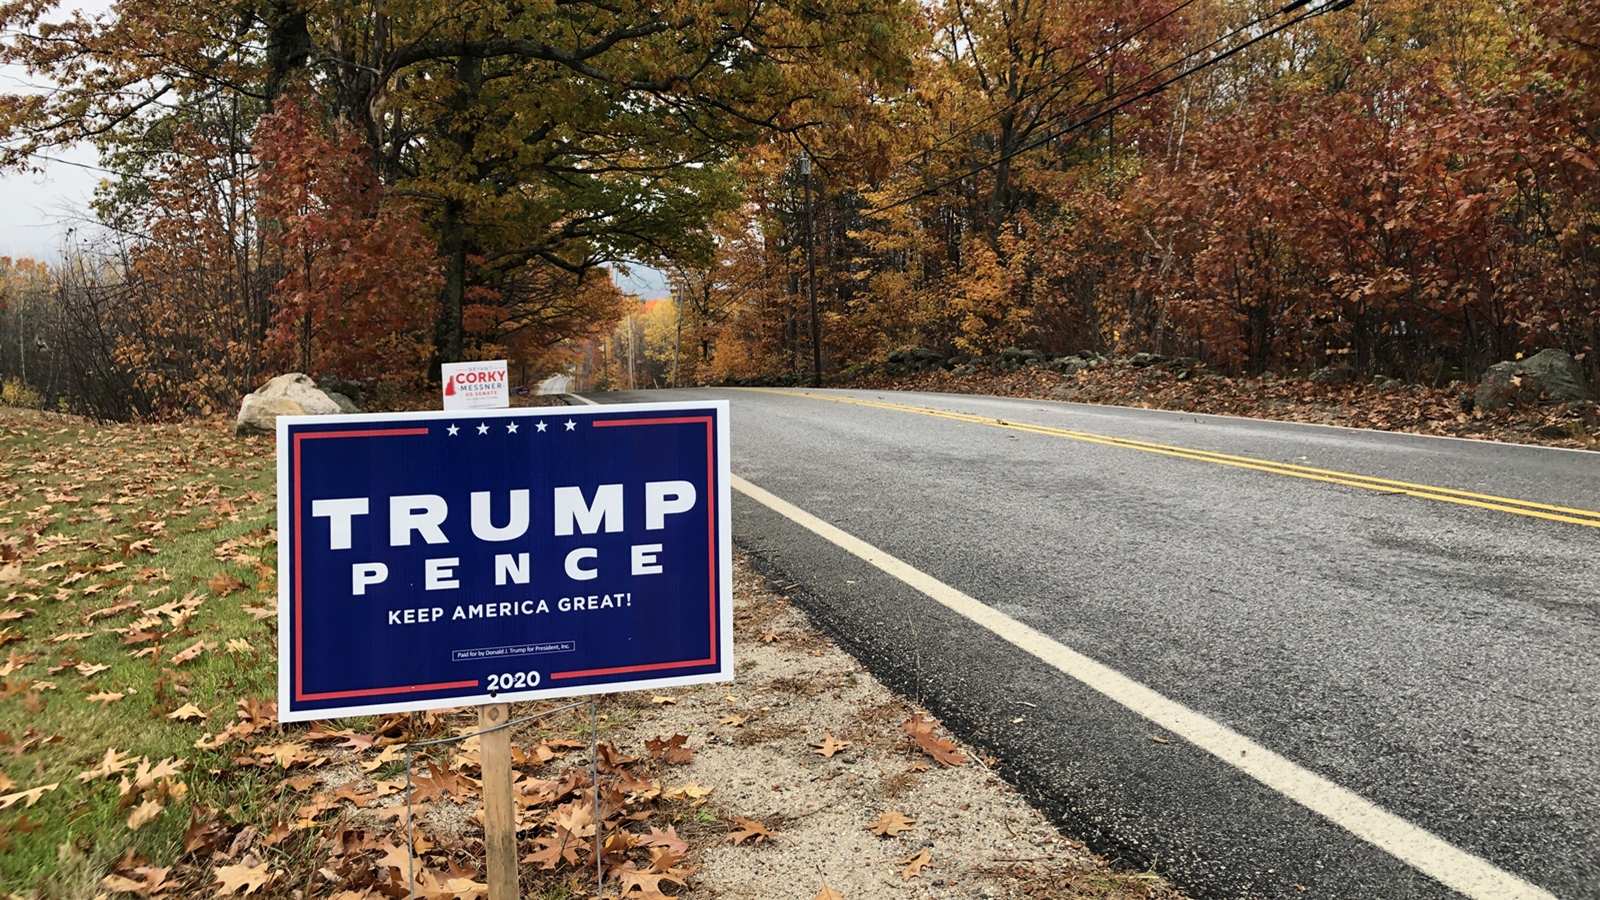 A Trump lawn sign by the roadside in New Hampshire.